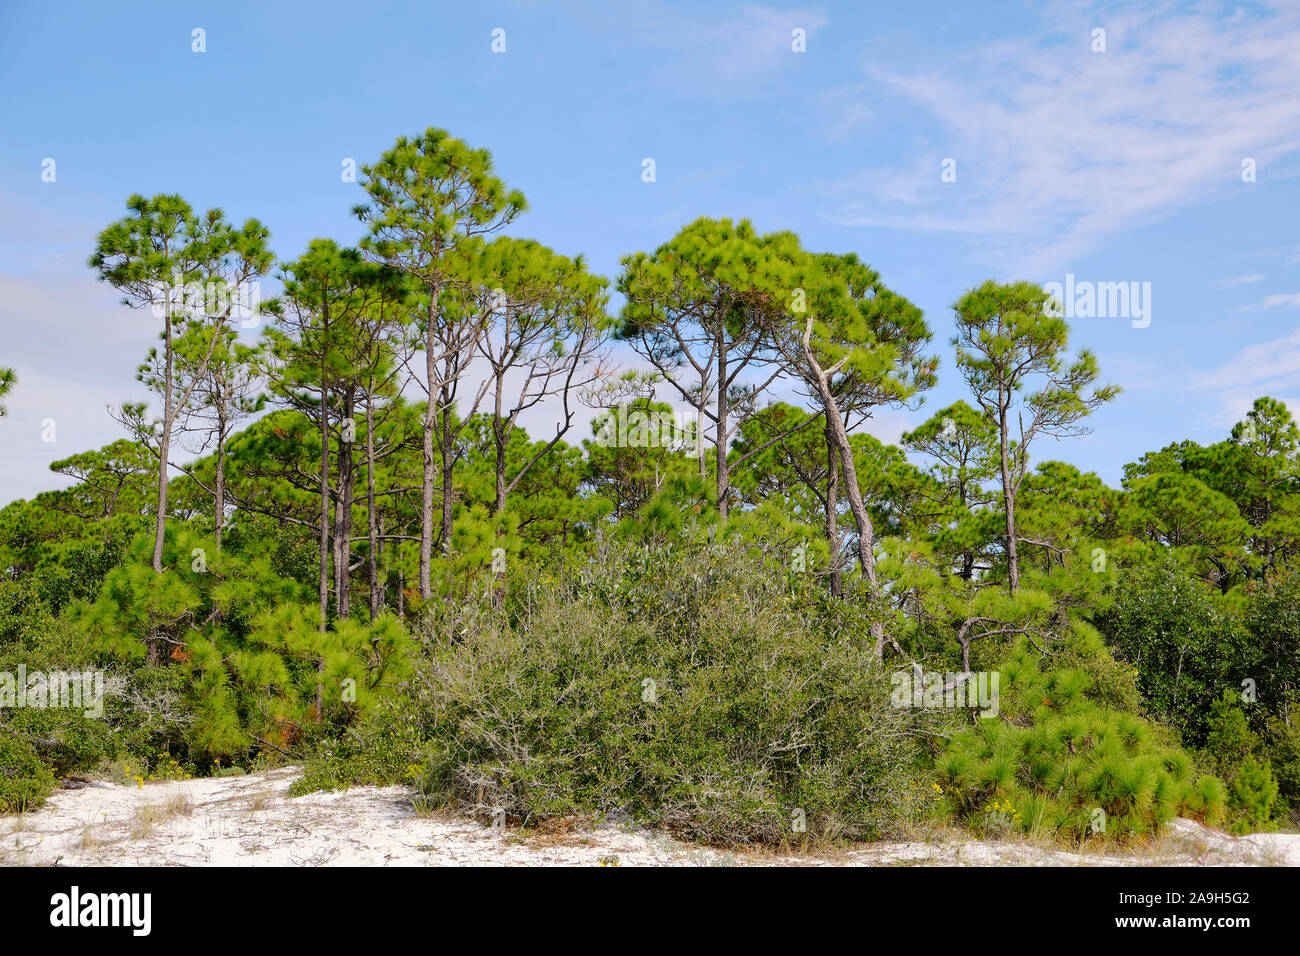 Longleaf pine trees and scrub pines growing in the sand dunes of Deer Lake State Park in south Walton County of the Florida panhandle, USA. Stock Photo